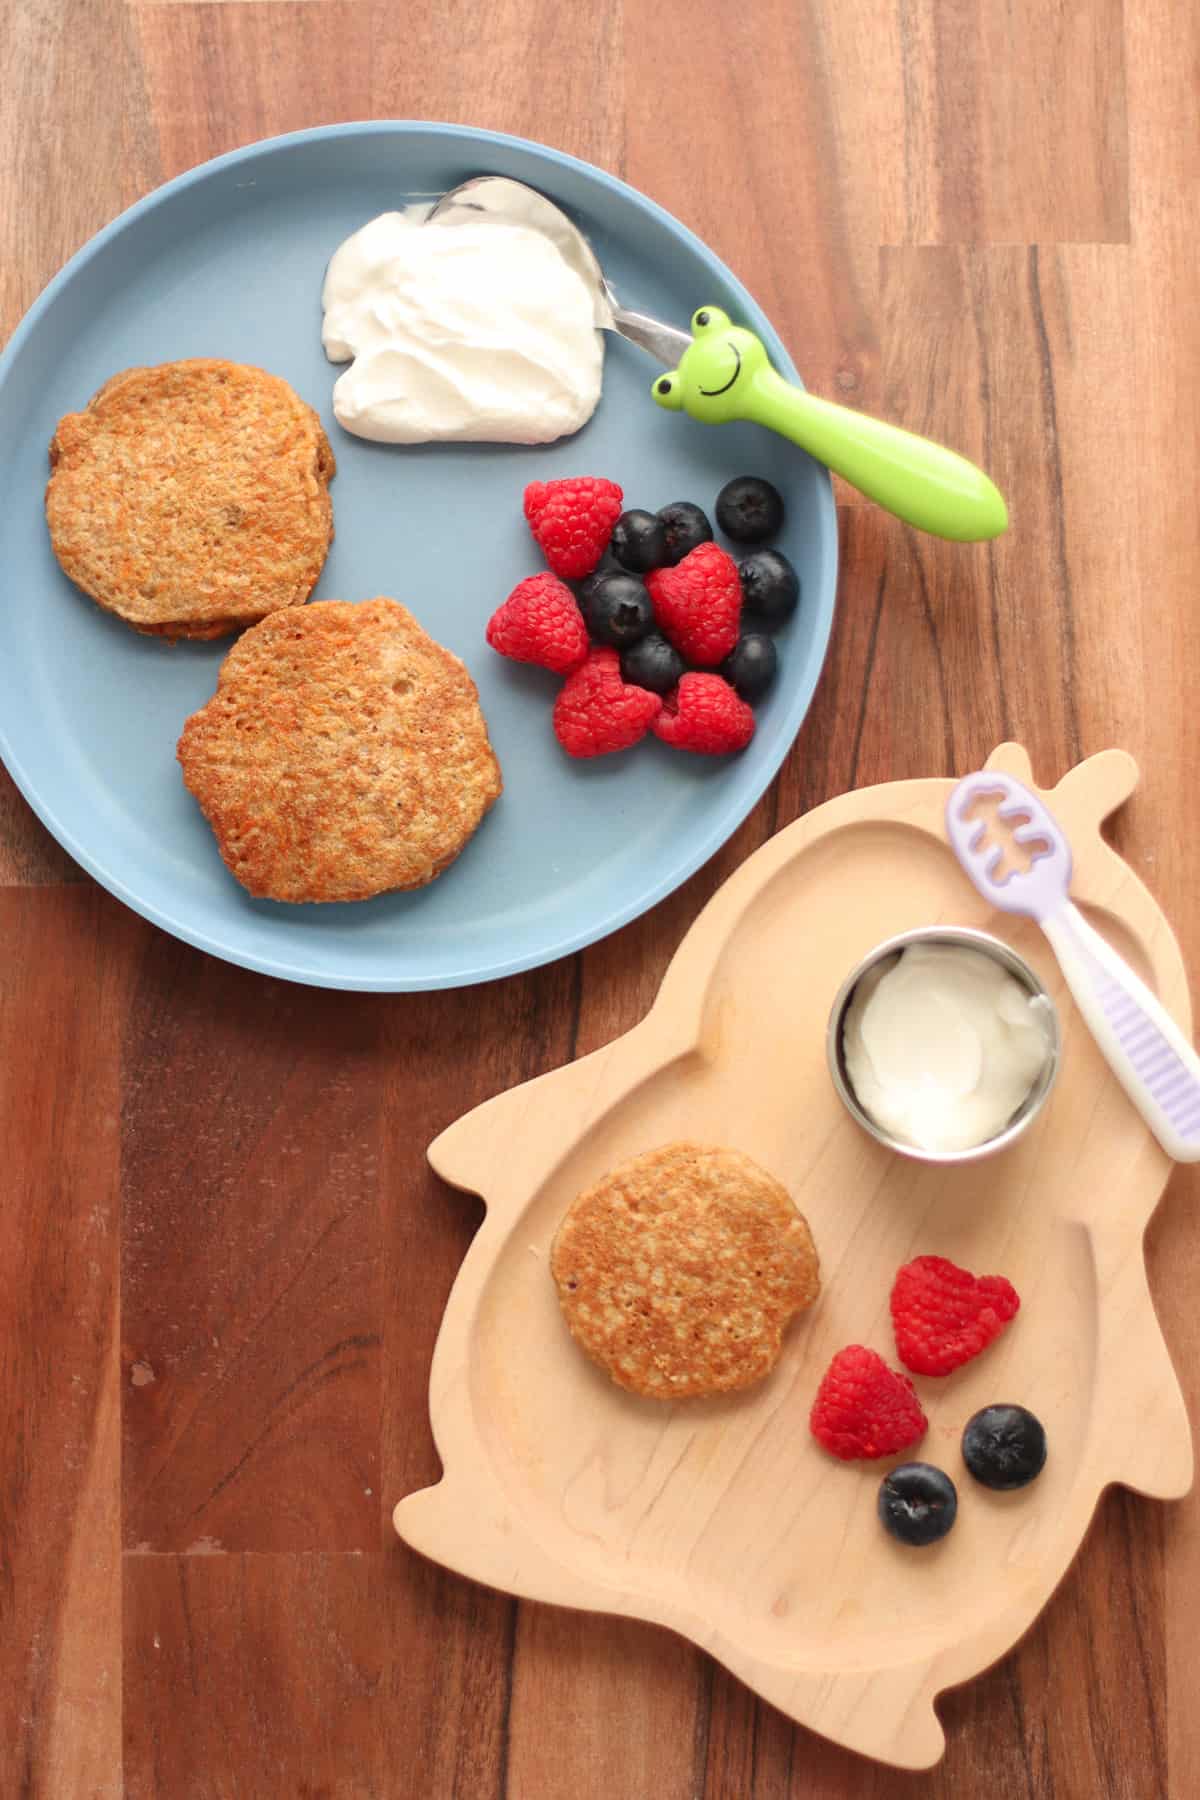 A toddler and baby's plate with carrot pancakes, berries, yogurt.